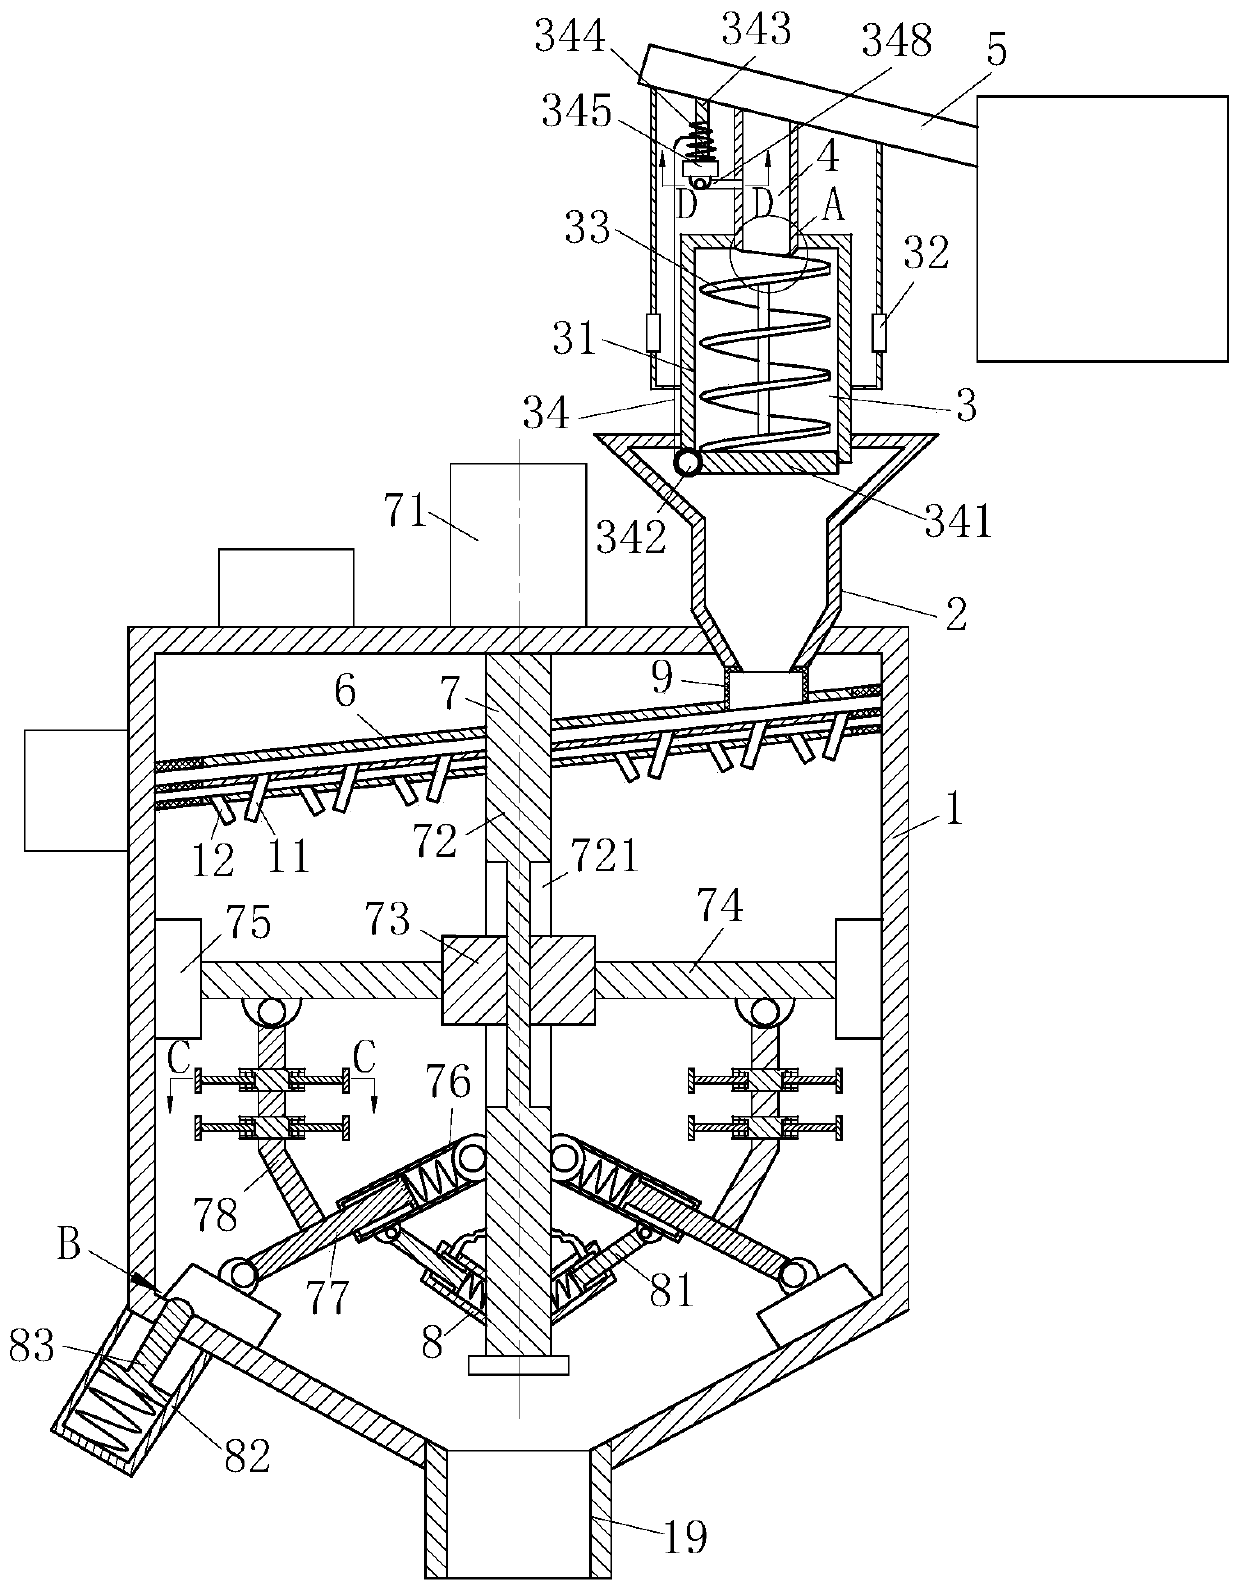 A concrete production device with automatic material control function